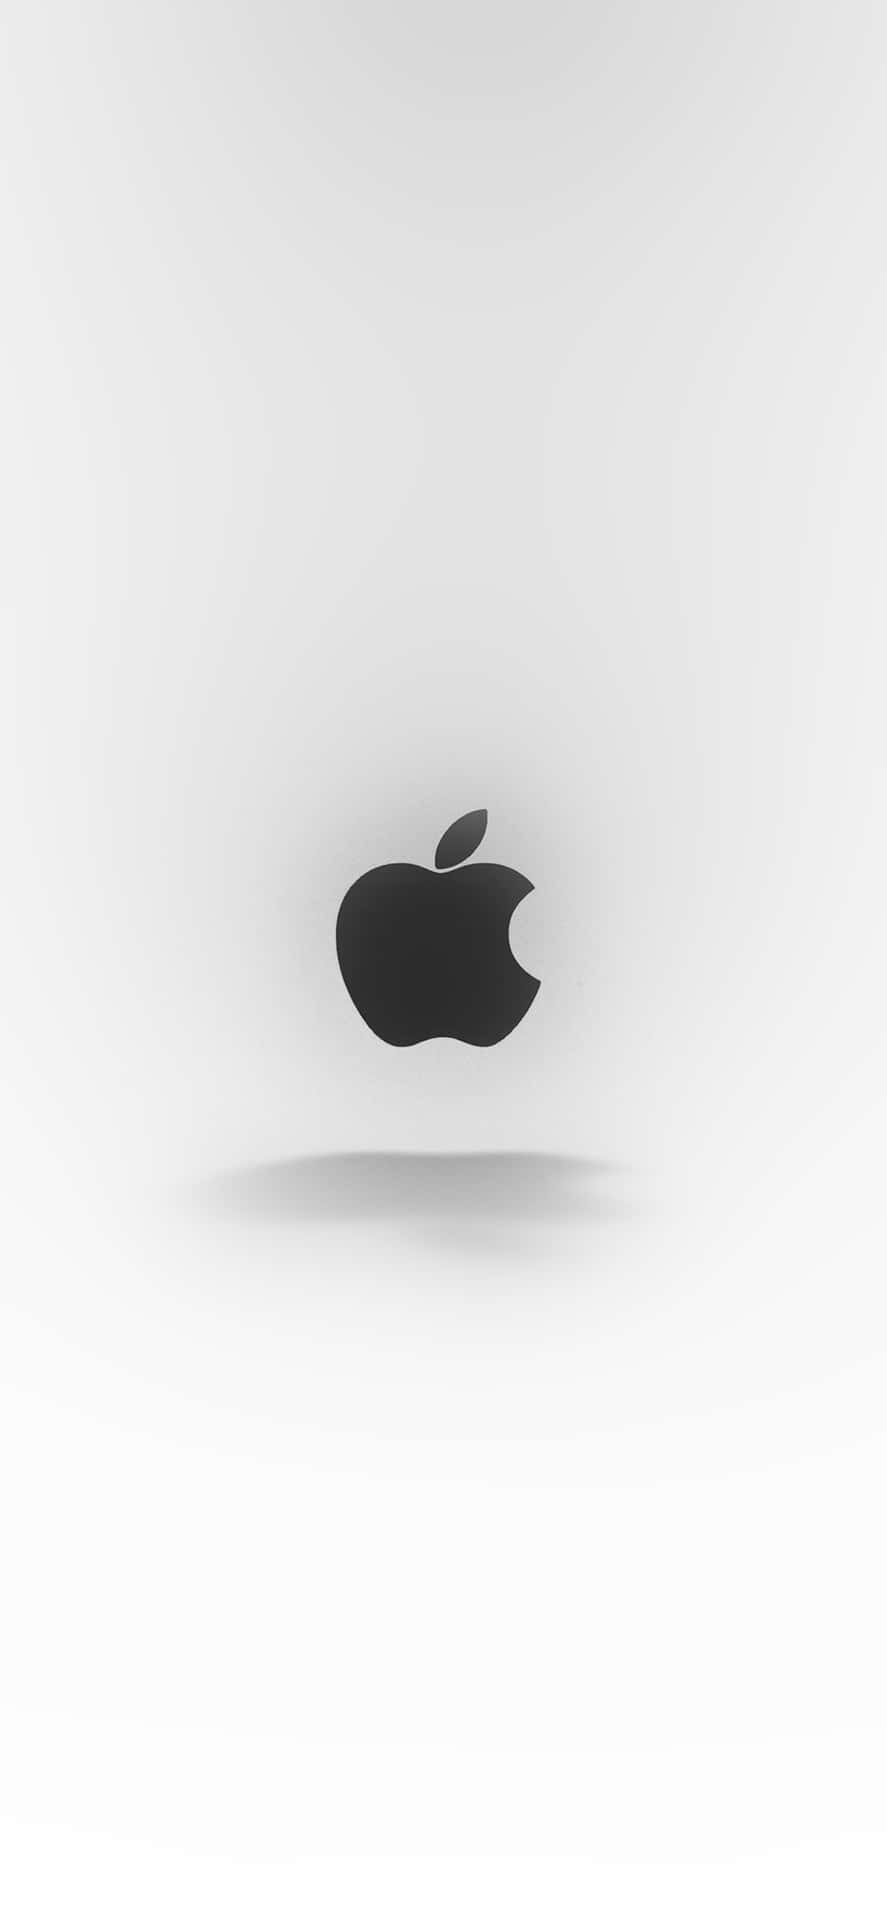 The Apple Logo on the Iphone X Wallpaper